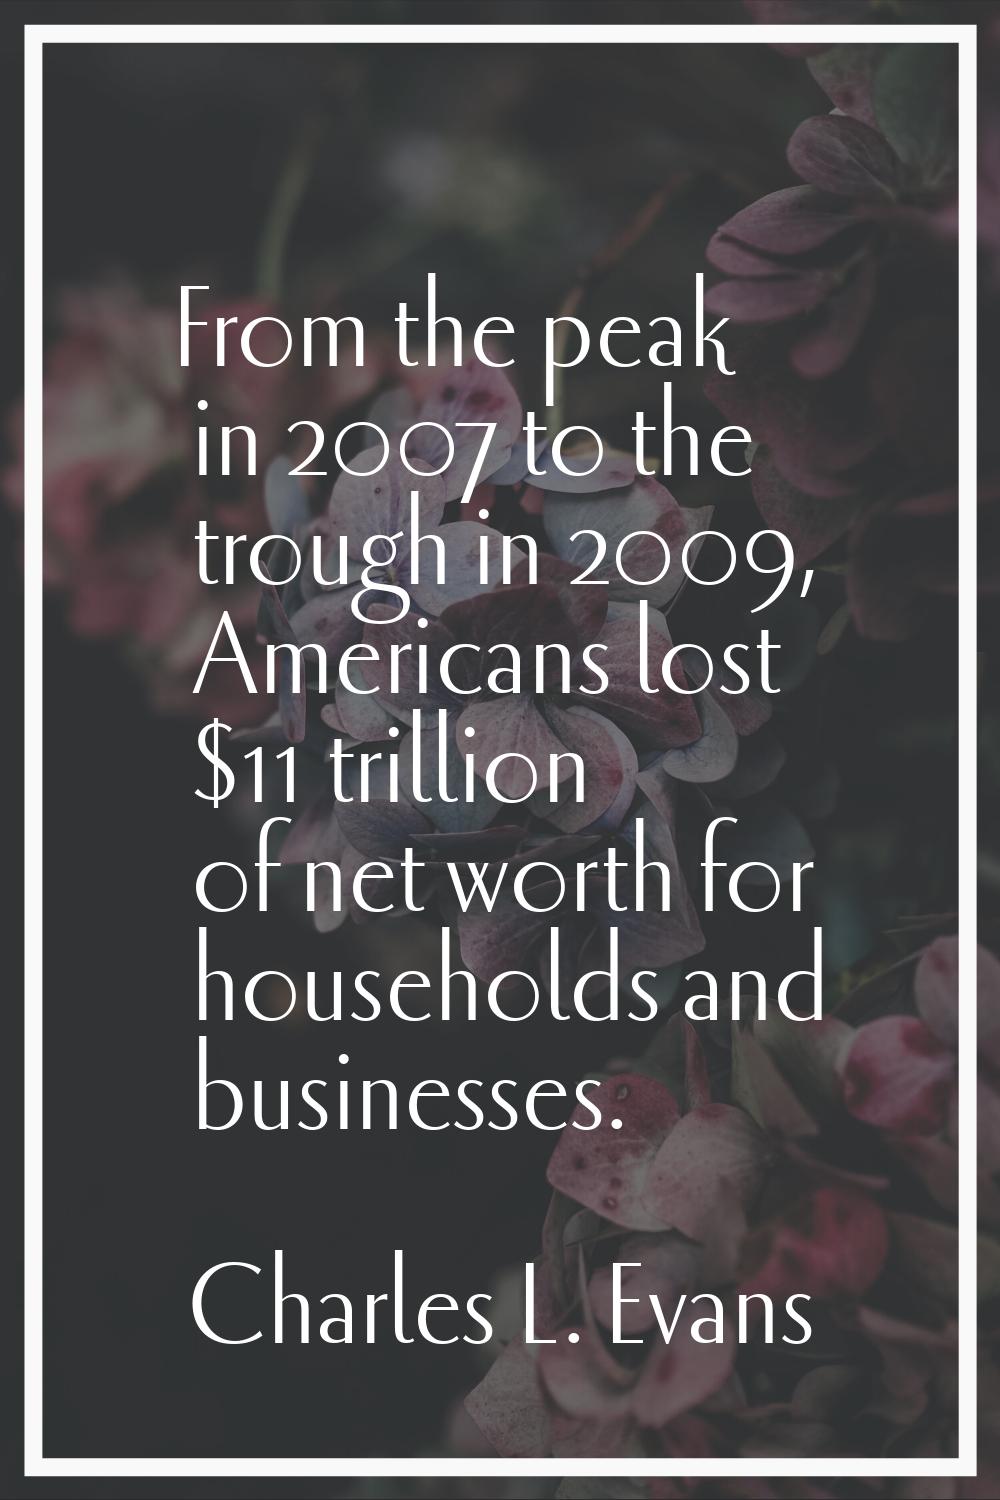 From the peak in 2007 to the trough in 2009, Americans lost $11 trillion of net worth for household